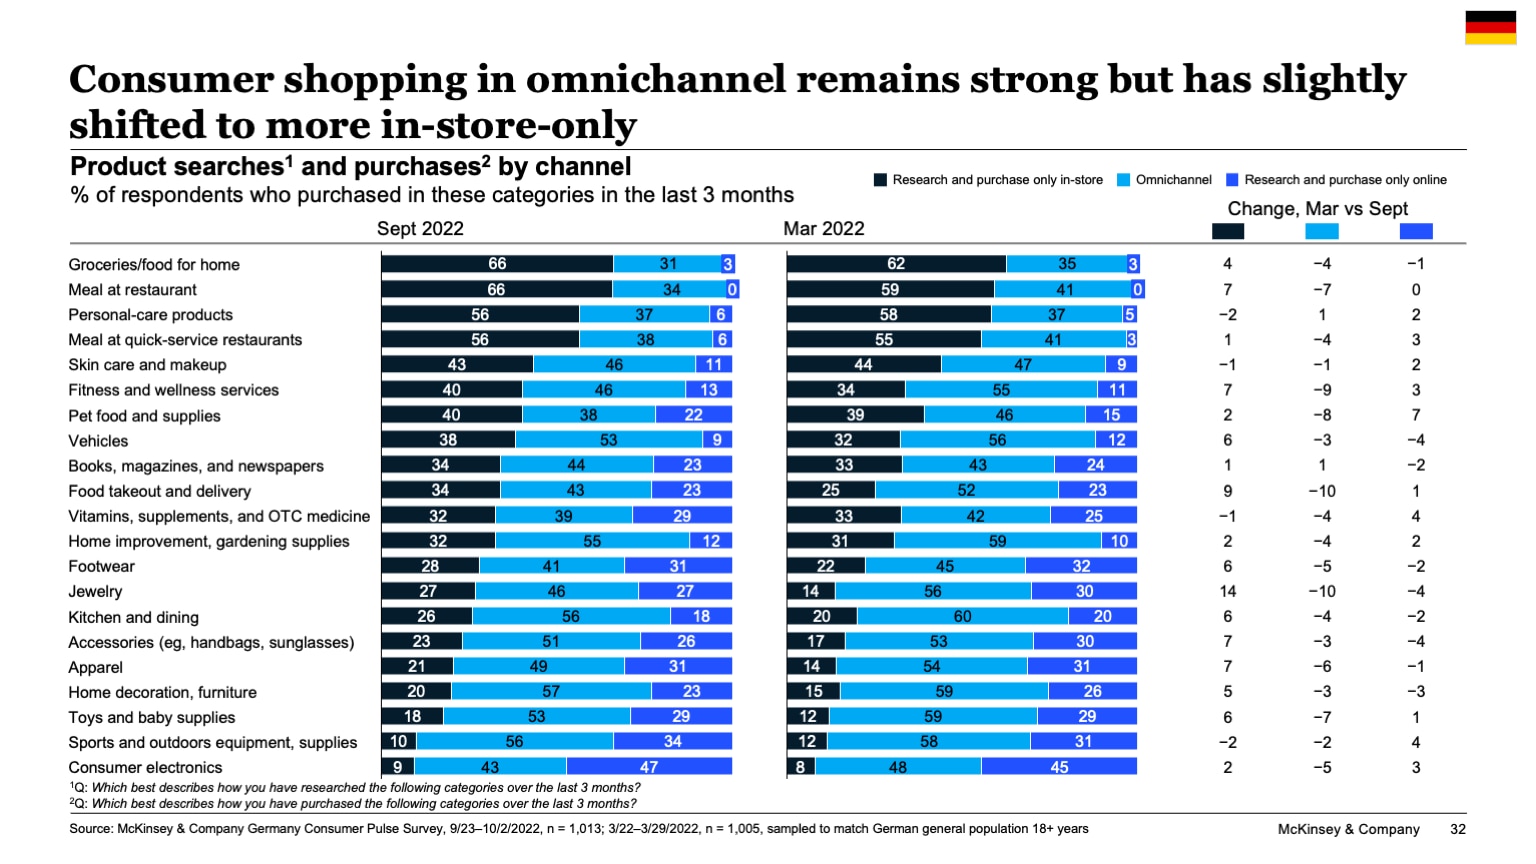 Consumer shopping in omnichannel remains strong but has slightly shifted to more in-store-only